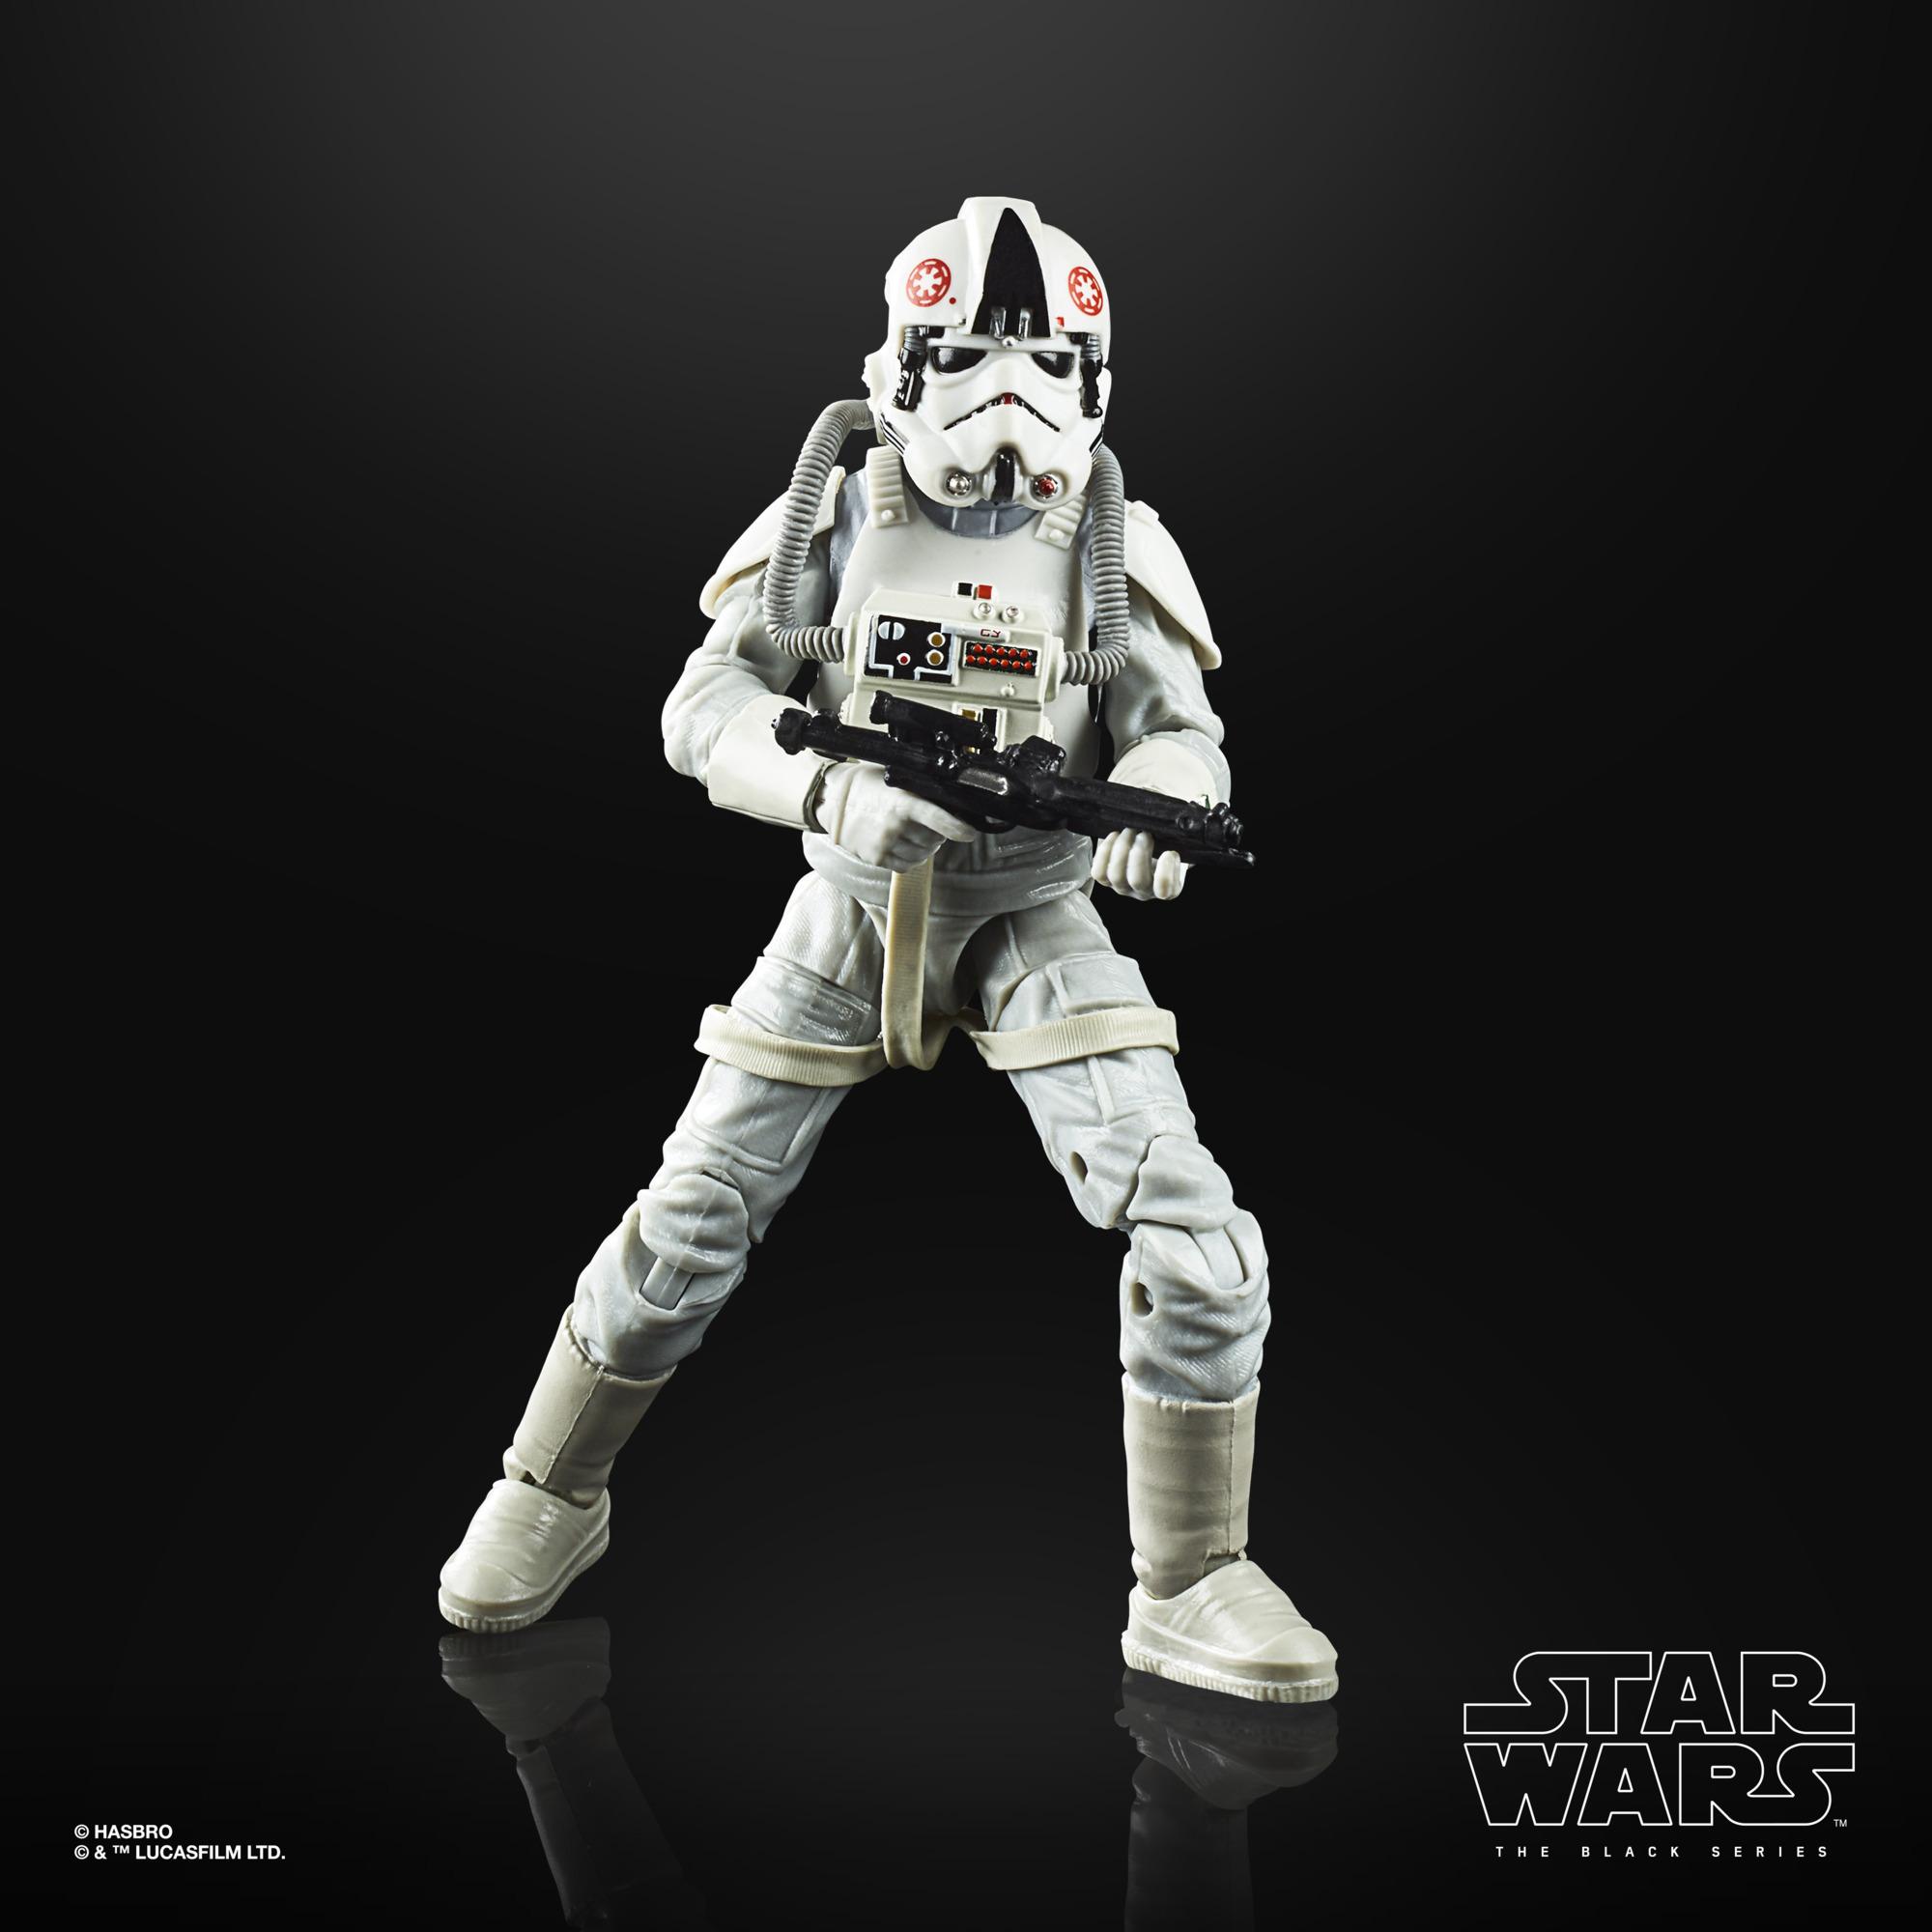 Star Wars 40th Anniversary 6 inch Action Figure for sale online 